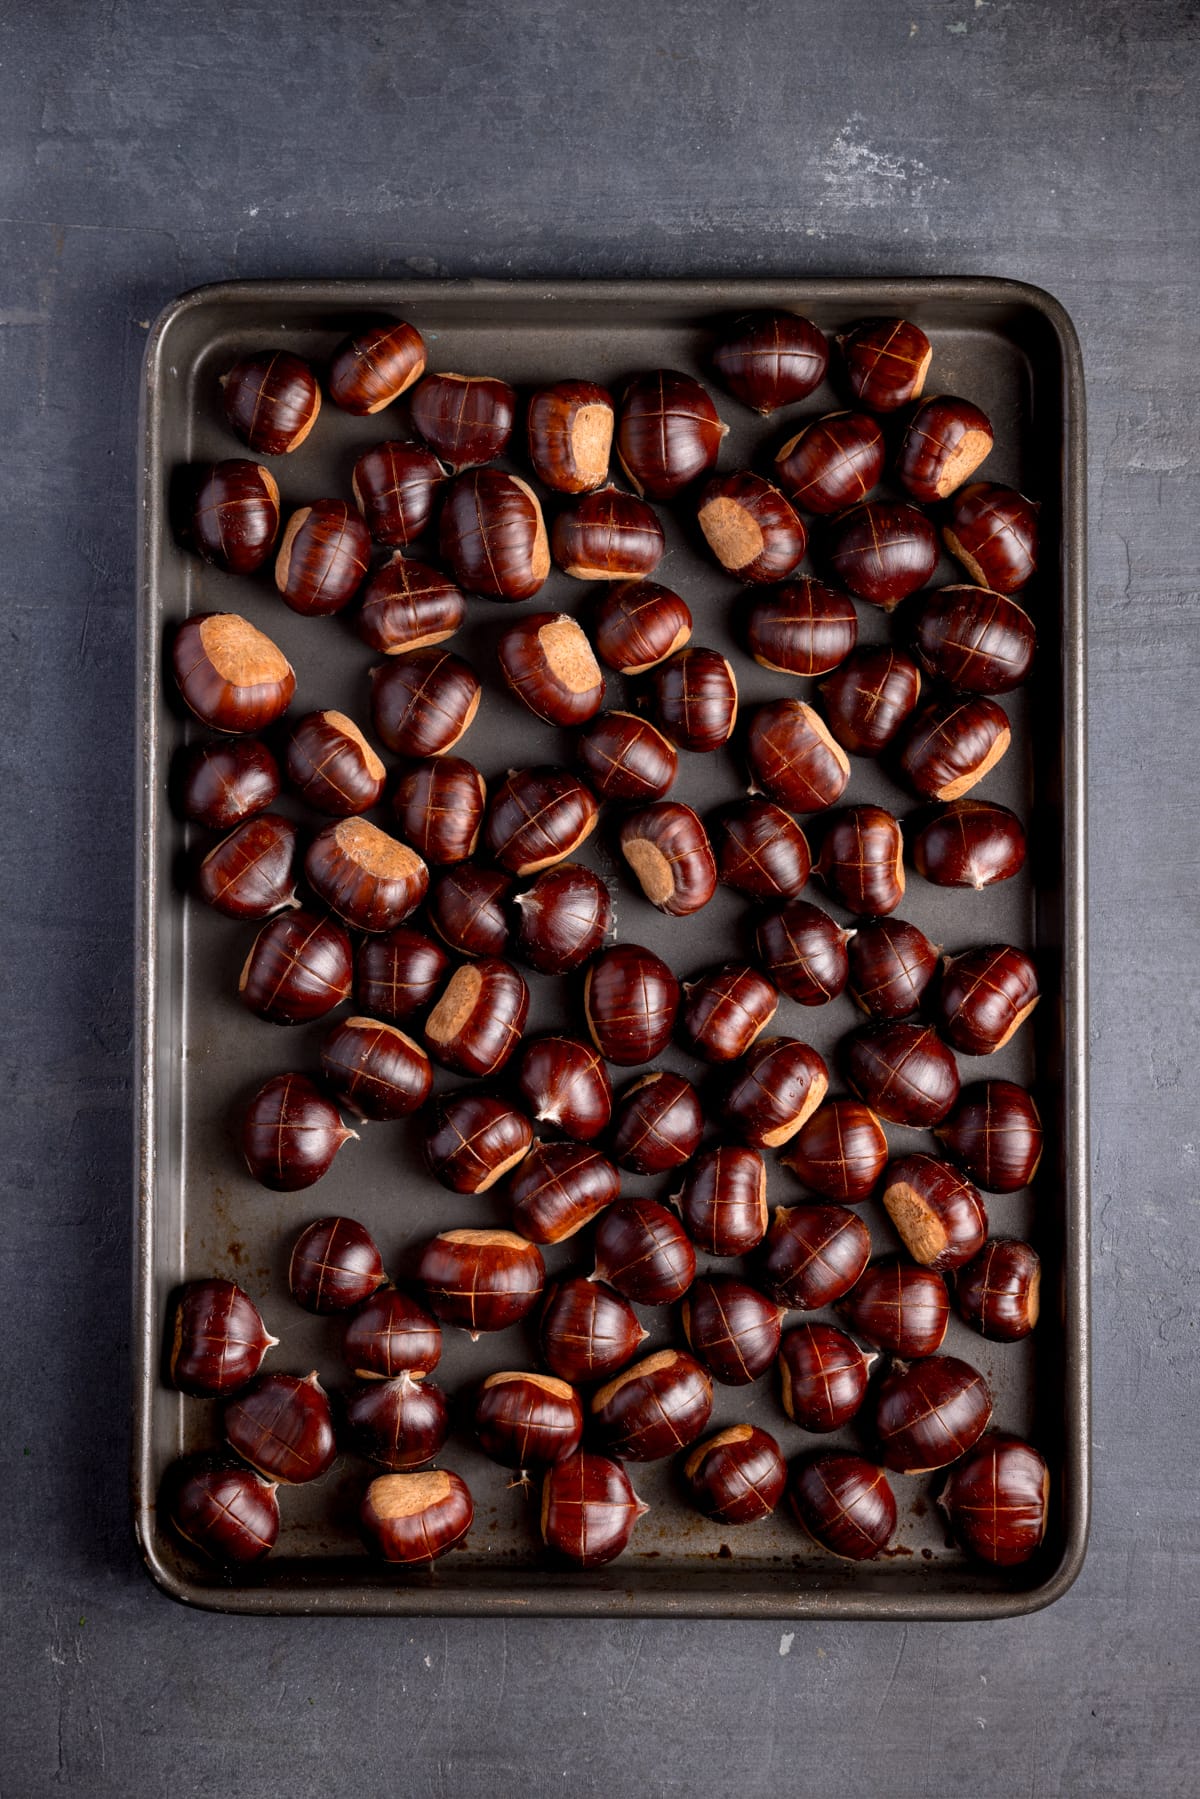 Raw chestnuts spread out on a metal baking tray with crosses cut in the top.